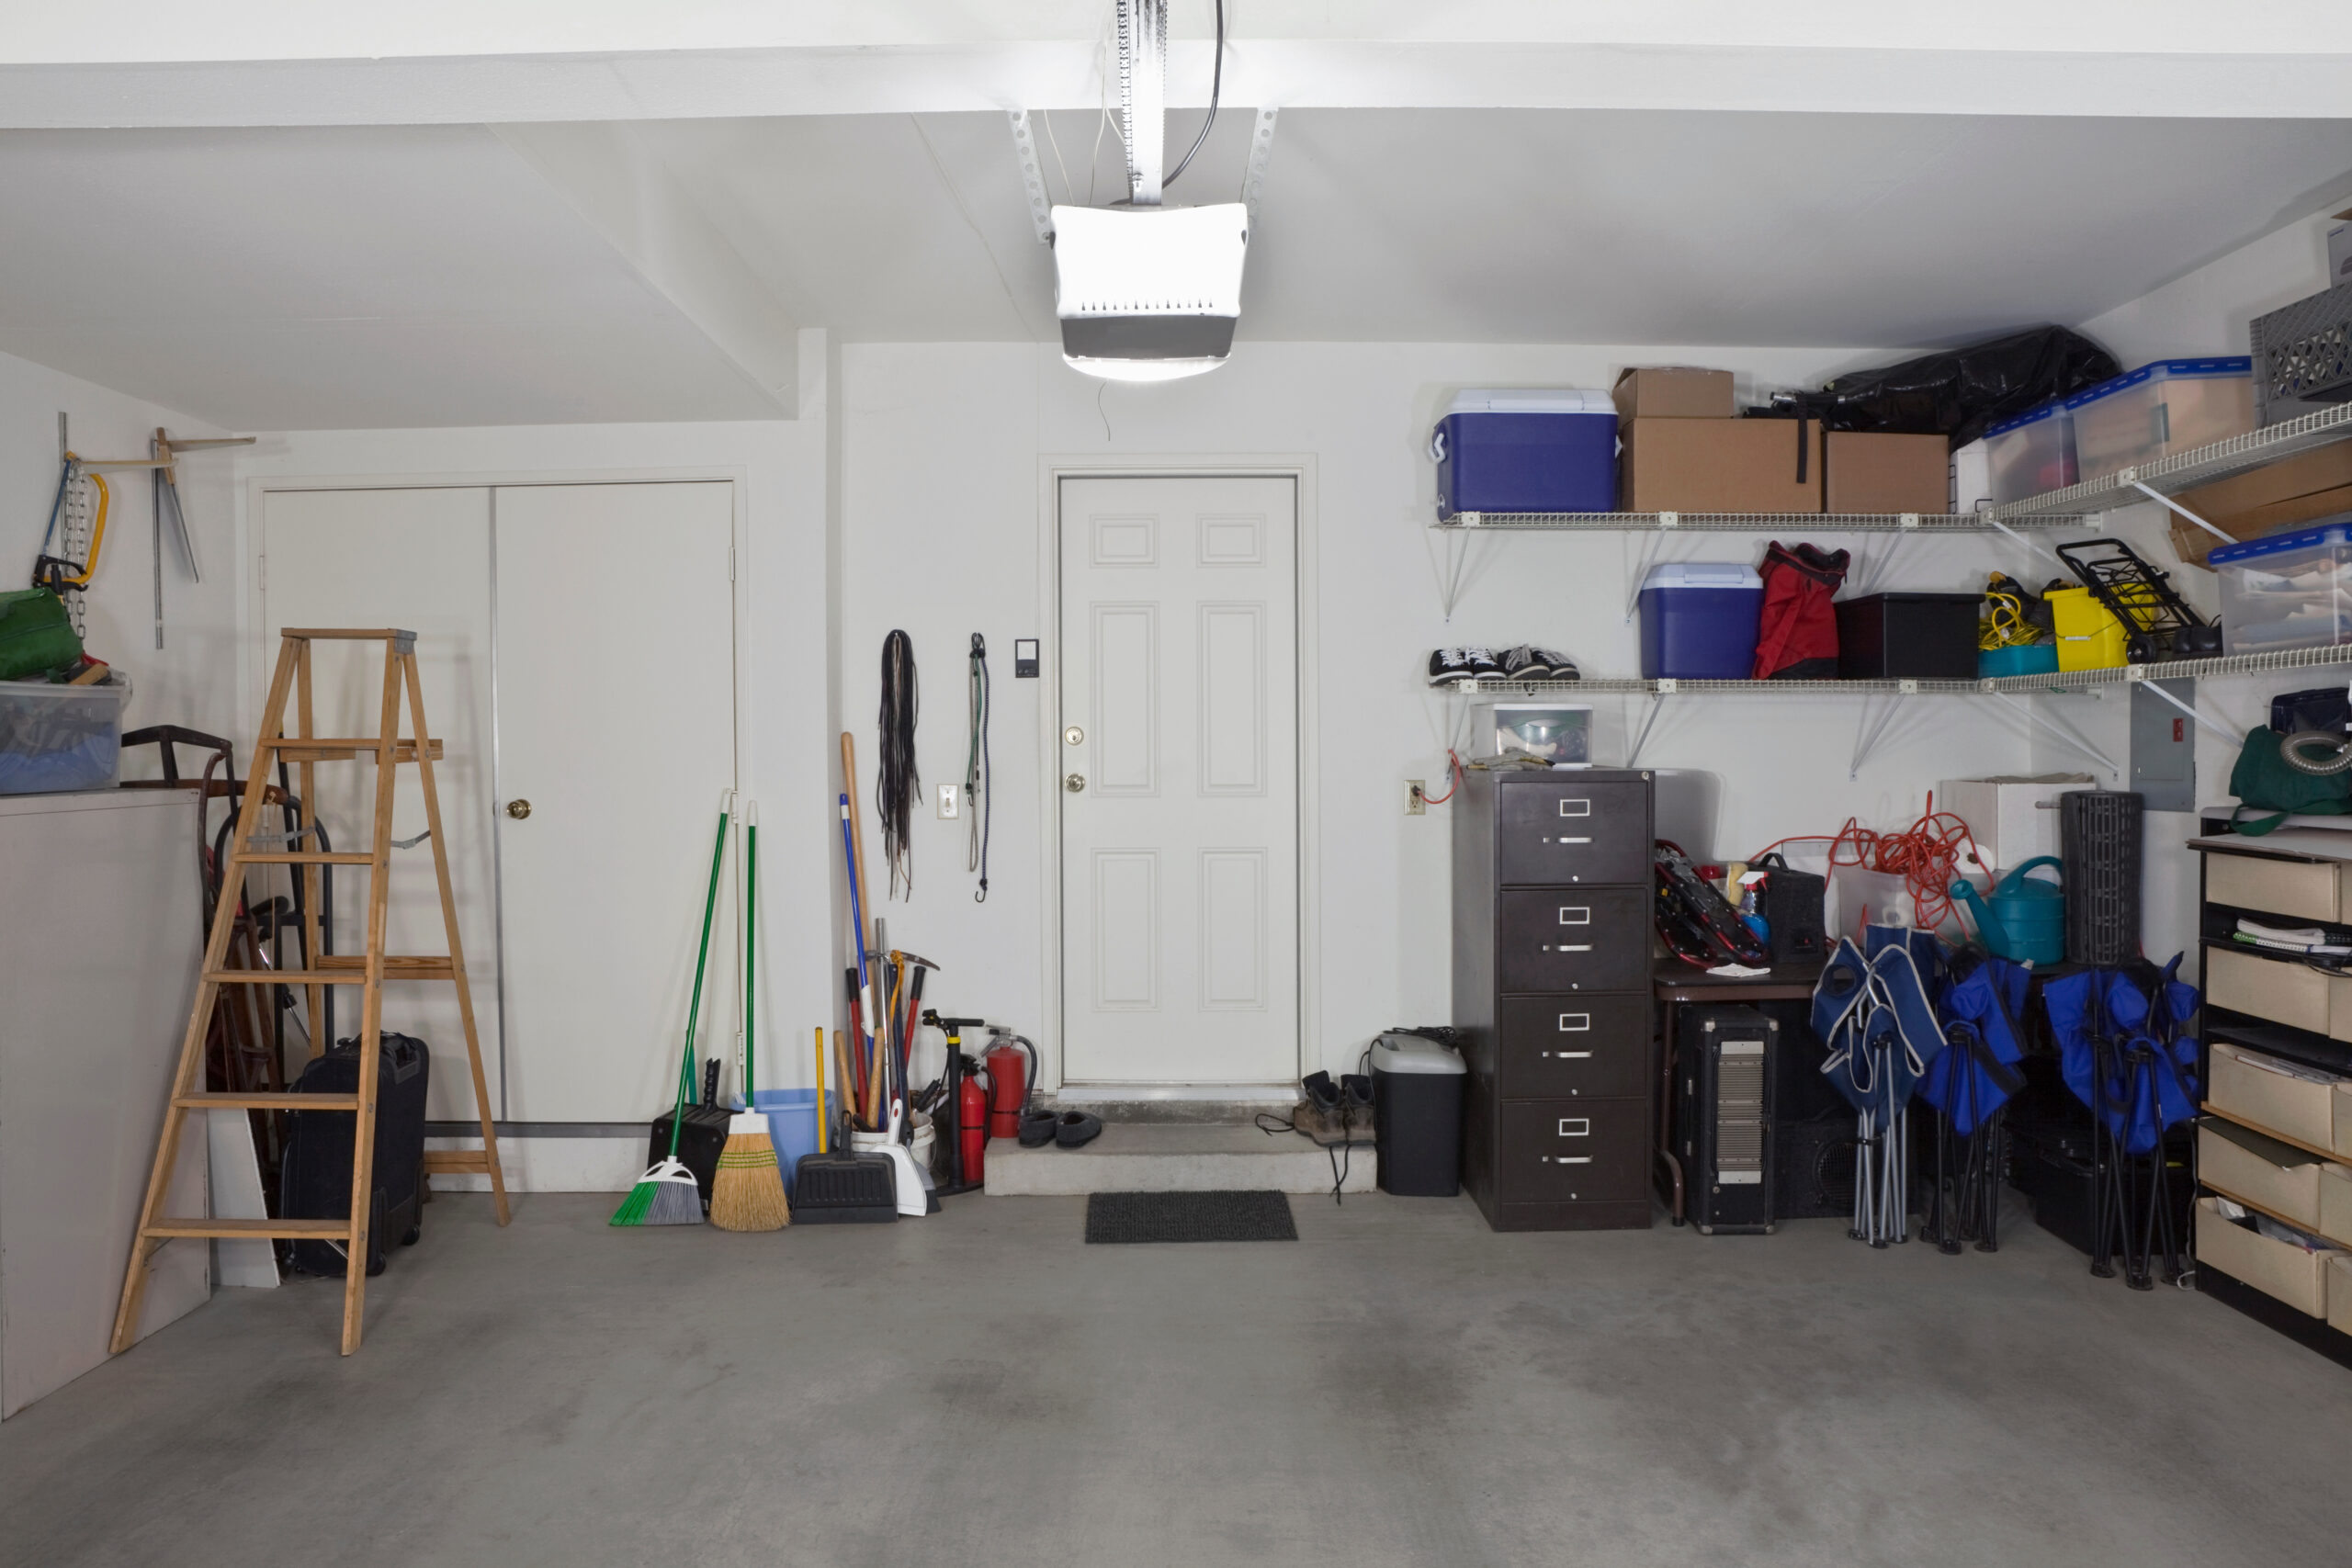 2 More Things You Should Move Out of the Garage